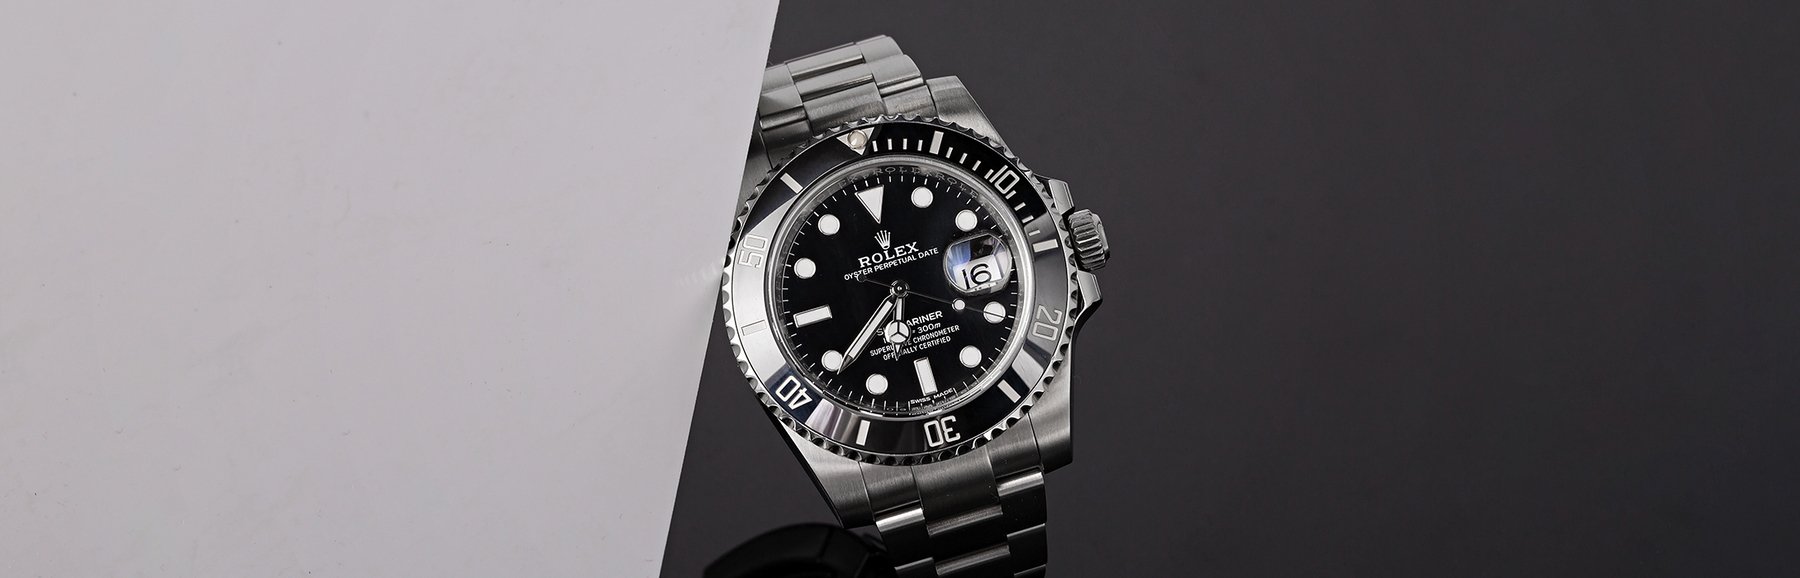 Best Rolex Watches For First Time Buyers